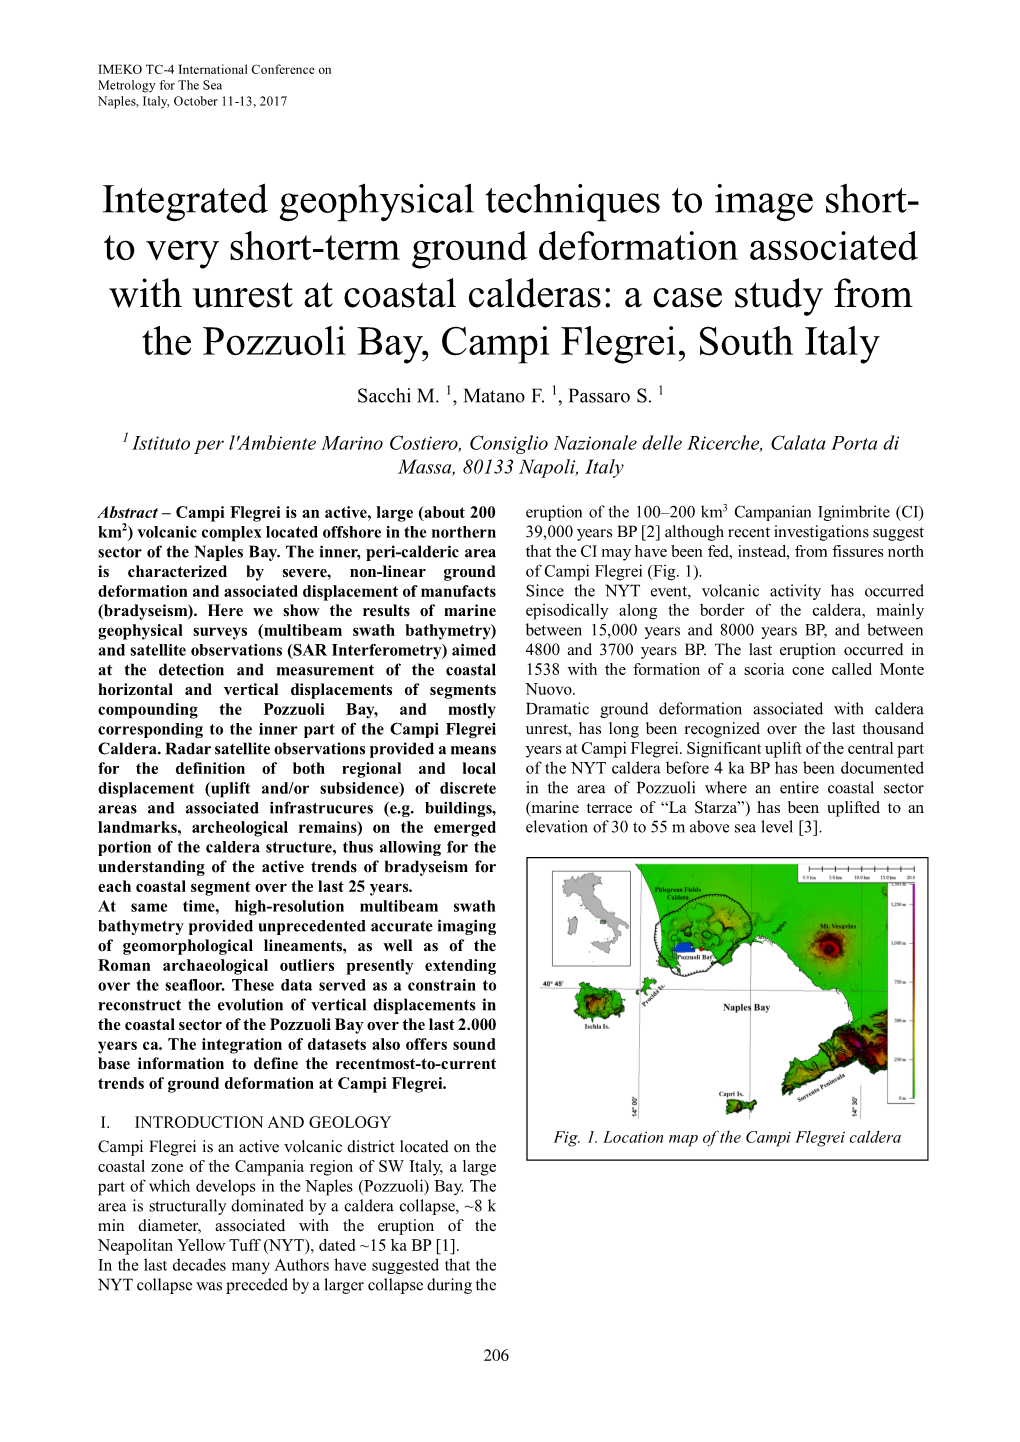 To Very Short-Term Ground Deformation Associated with Unrest at Coastal Calderas: a Case Study from the Pozzuoli Bay, Campi Flegrei, South Italy